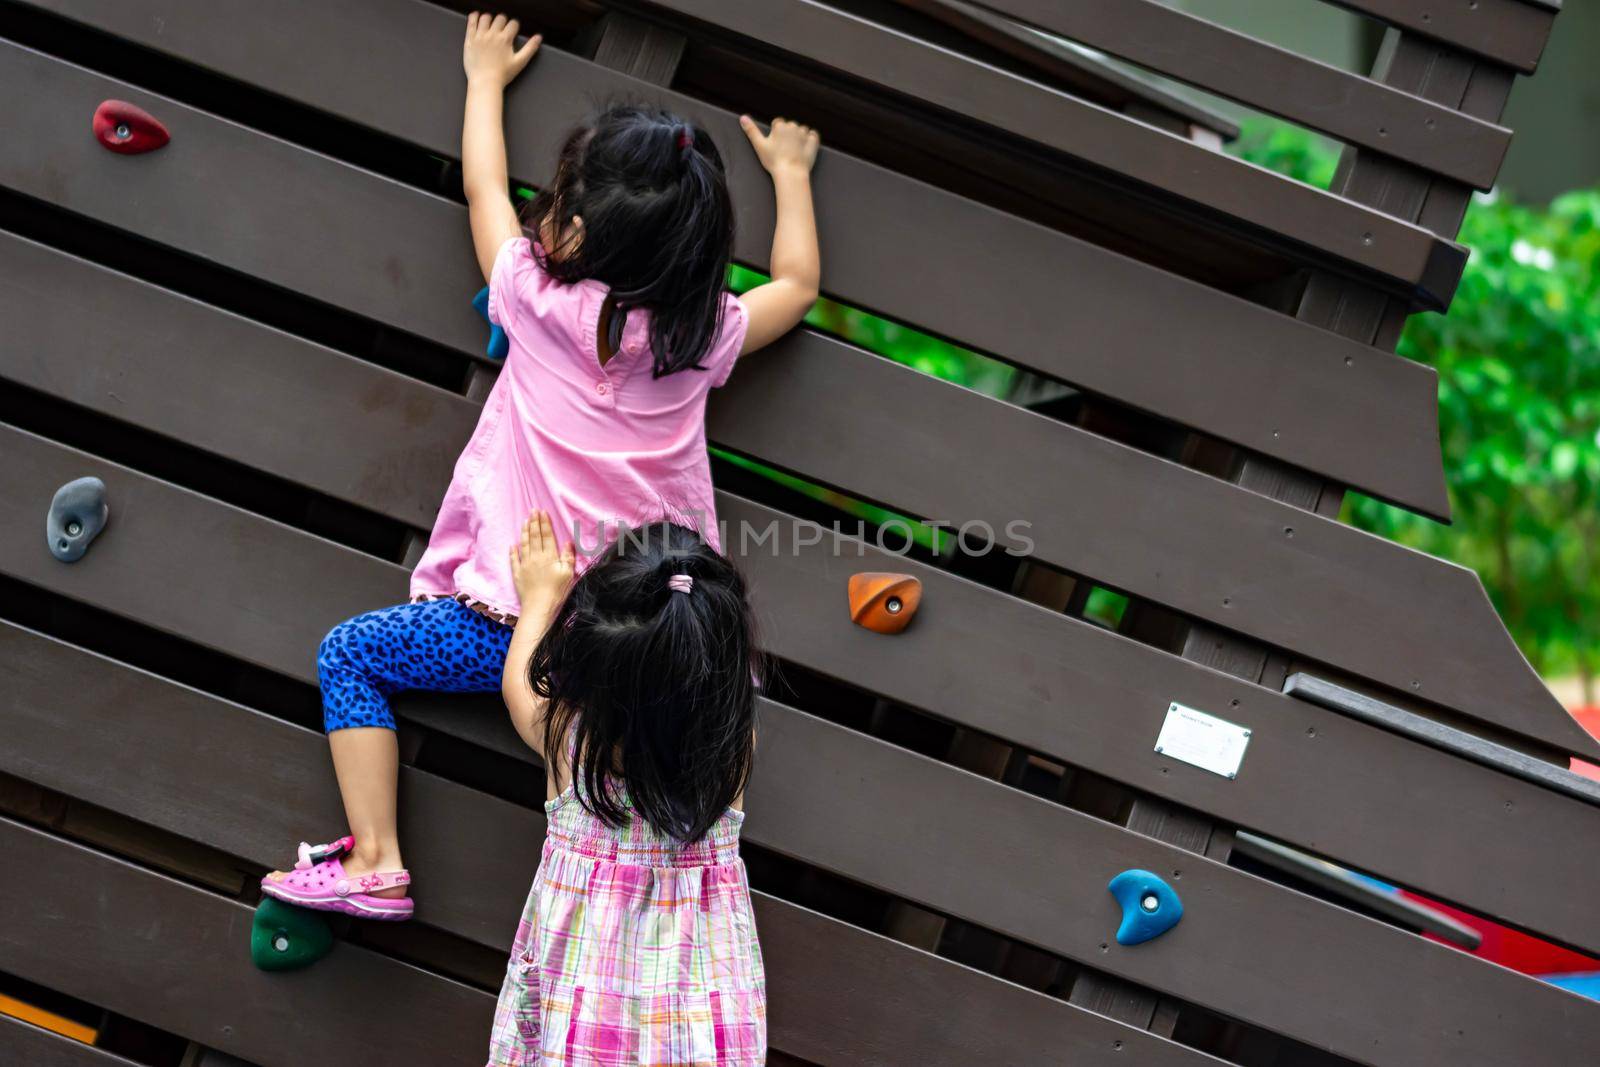 Pretty asian little twins girls while climbing in a playground and helping each other by billroque